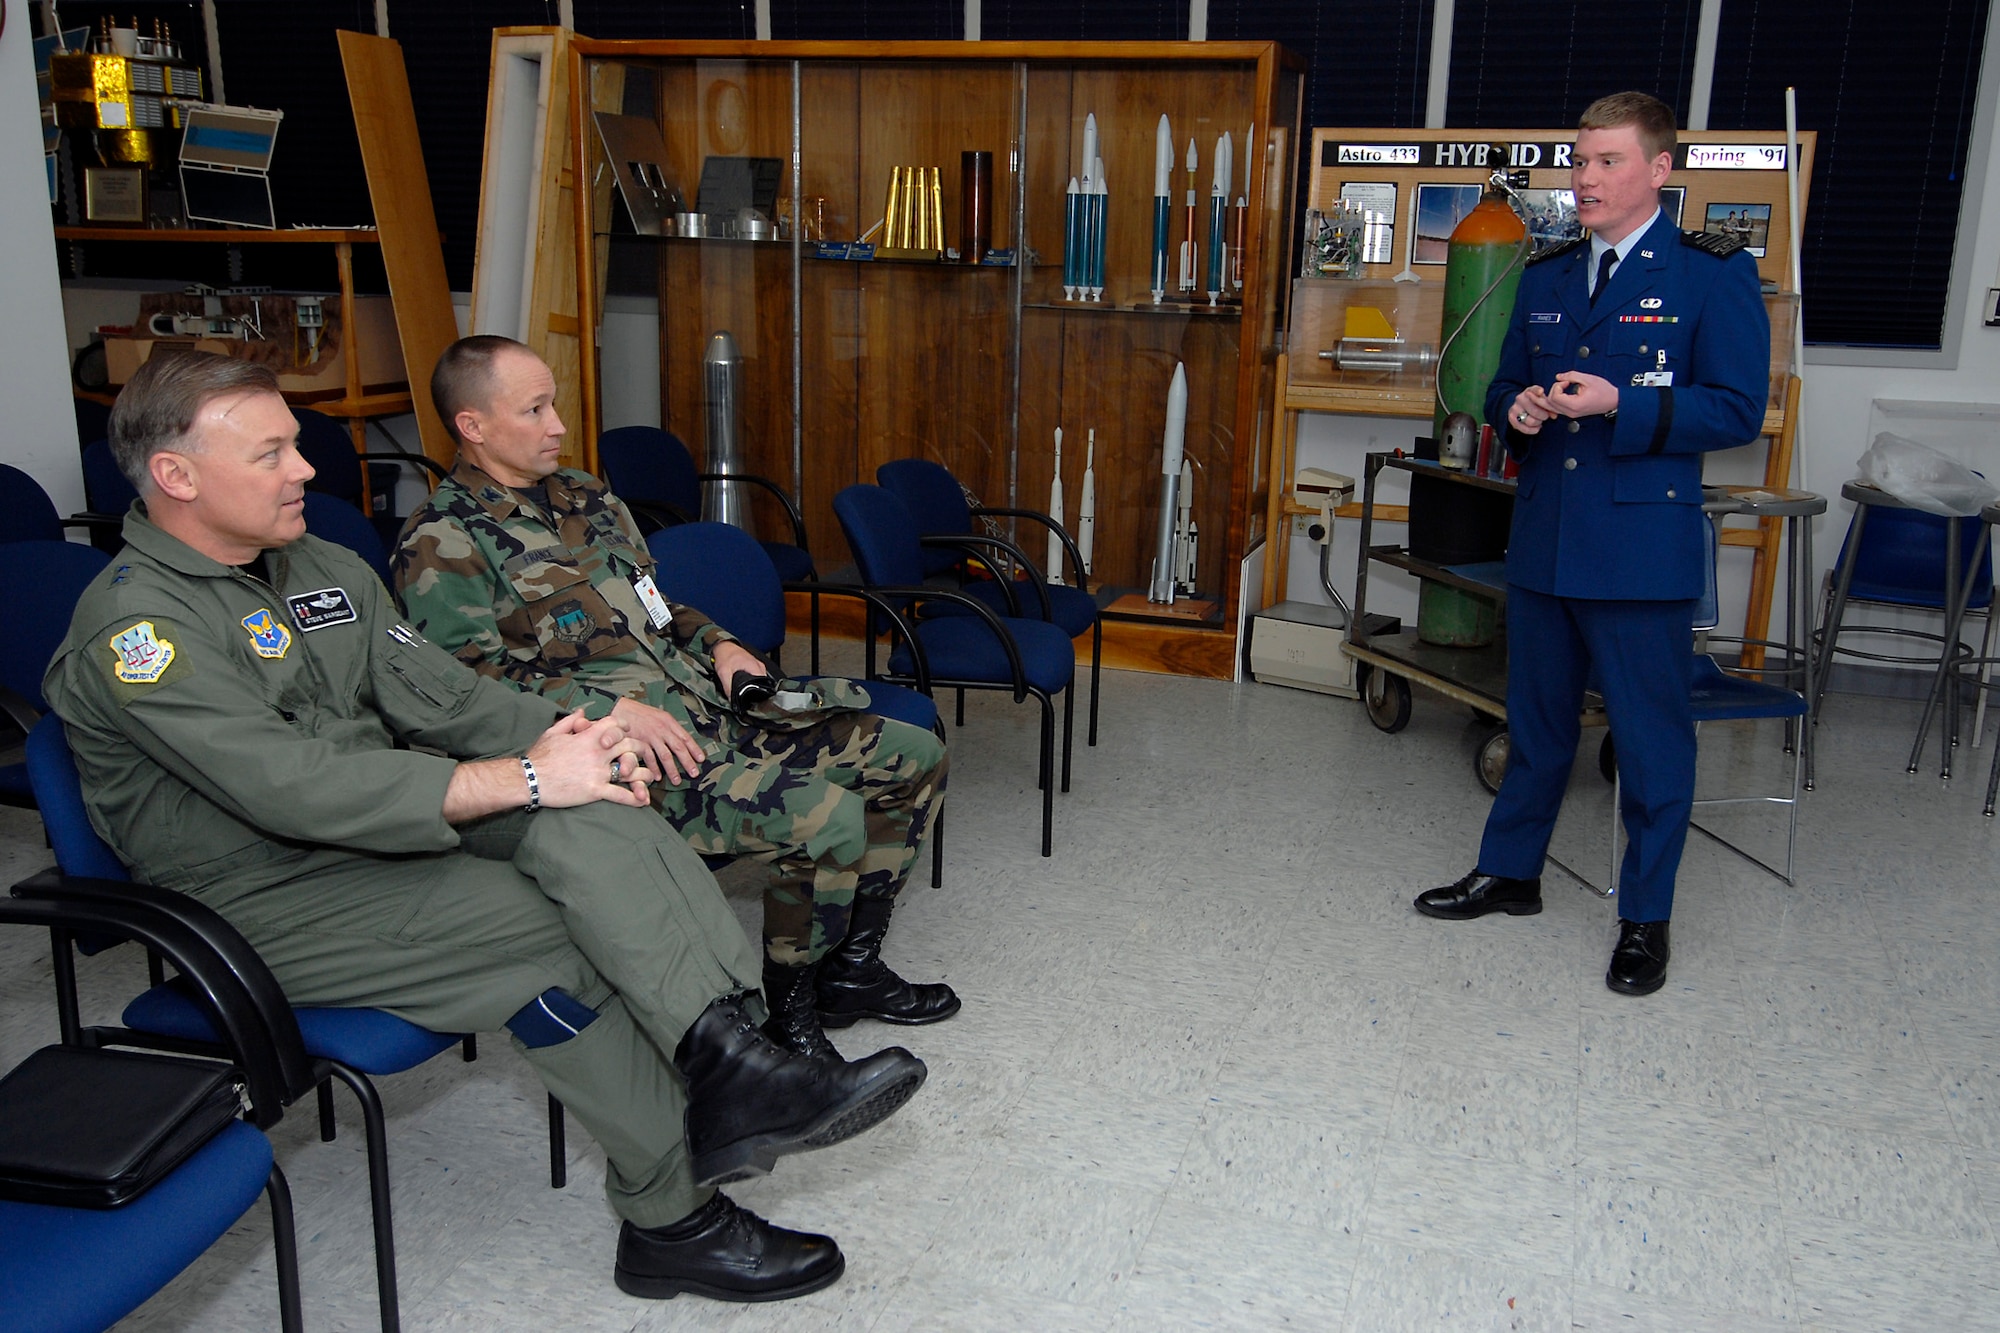 (Left) Maj. Gen. Stephen T. Sargeant, Air Force Operational Test and Evaluation Center Commander, listens to a U.S. Air Force Academy cadet during a Cadet Capstone team briefing.